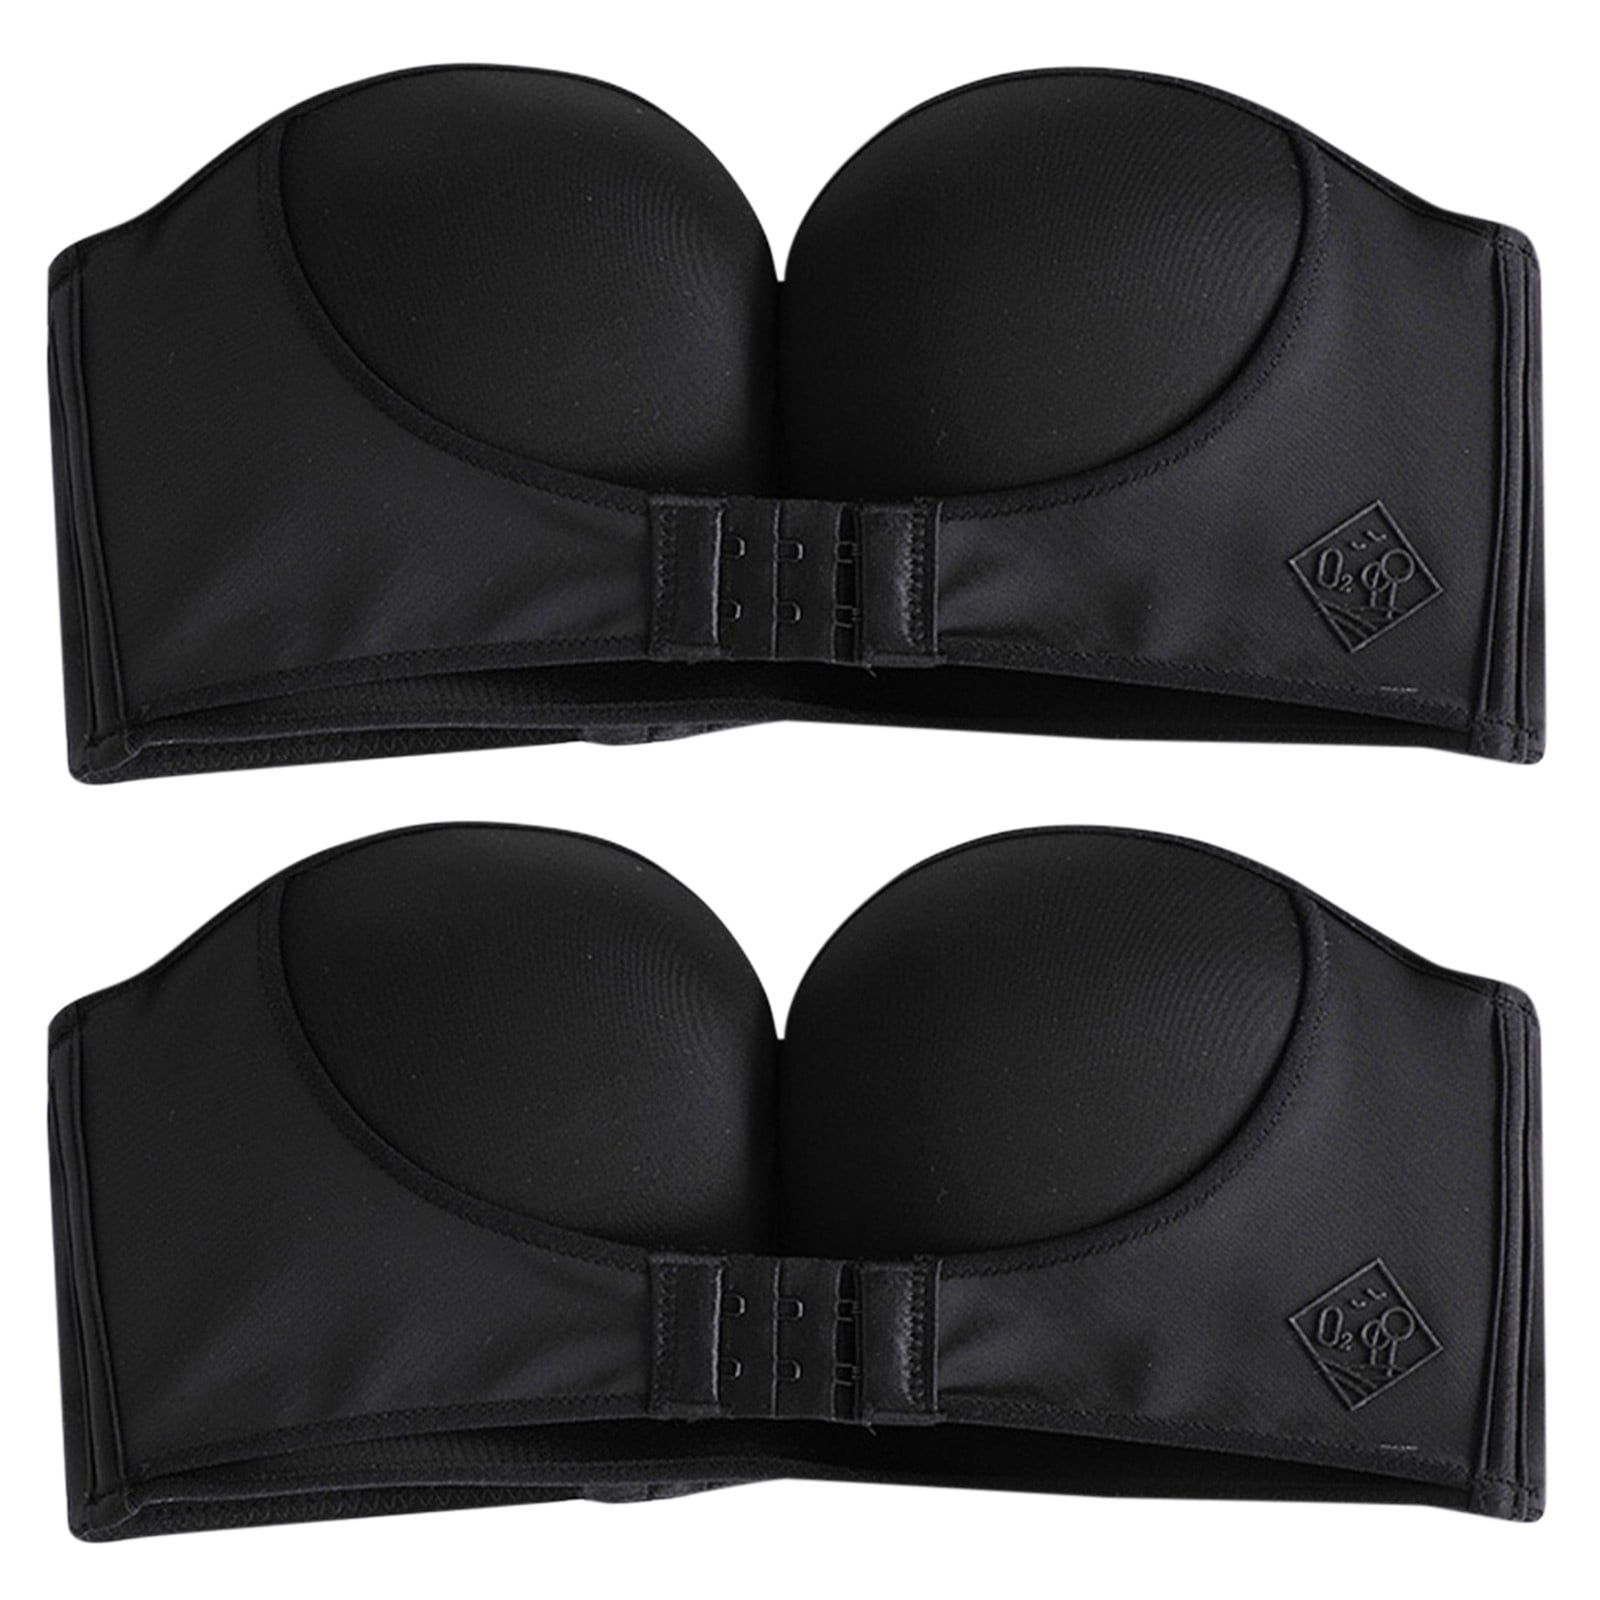 Bras For Women Push Up 2Pcs Solid Color Strapless Non Slip